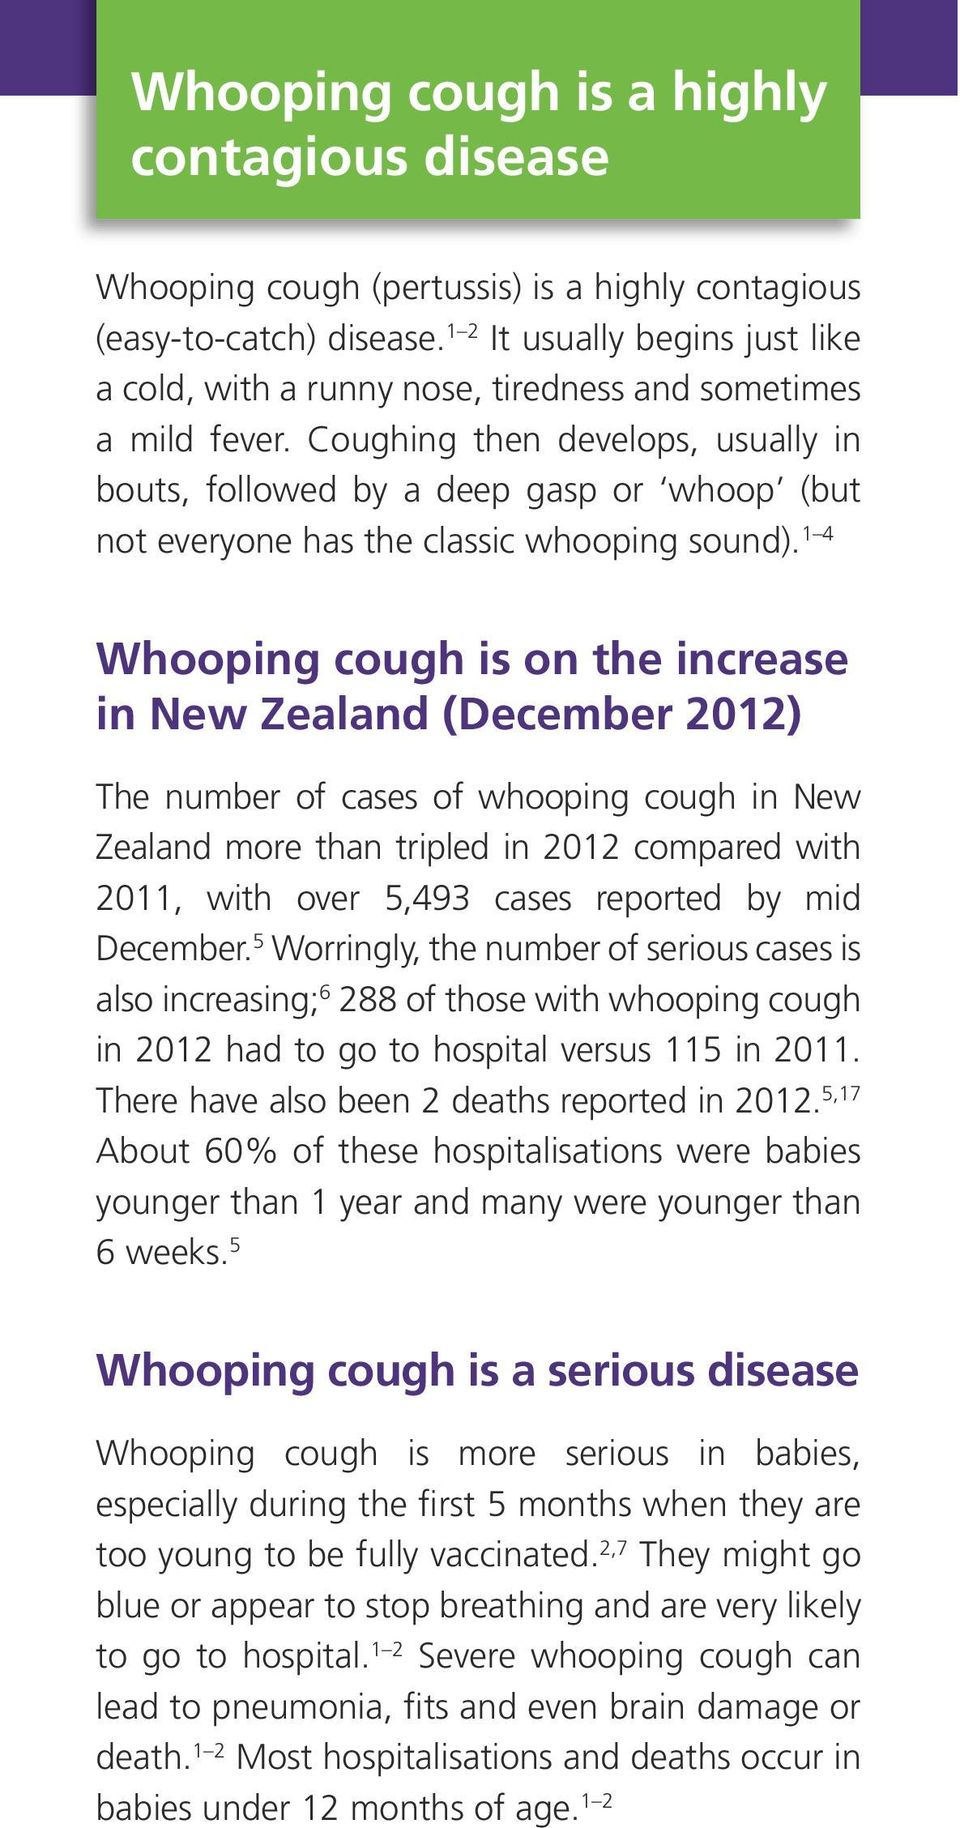 Coughing then develops, usually in bouts, followed by a deep gasp or whoop (but not everyone has the classic whooping sound).